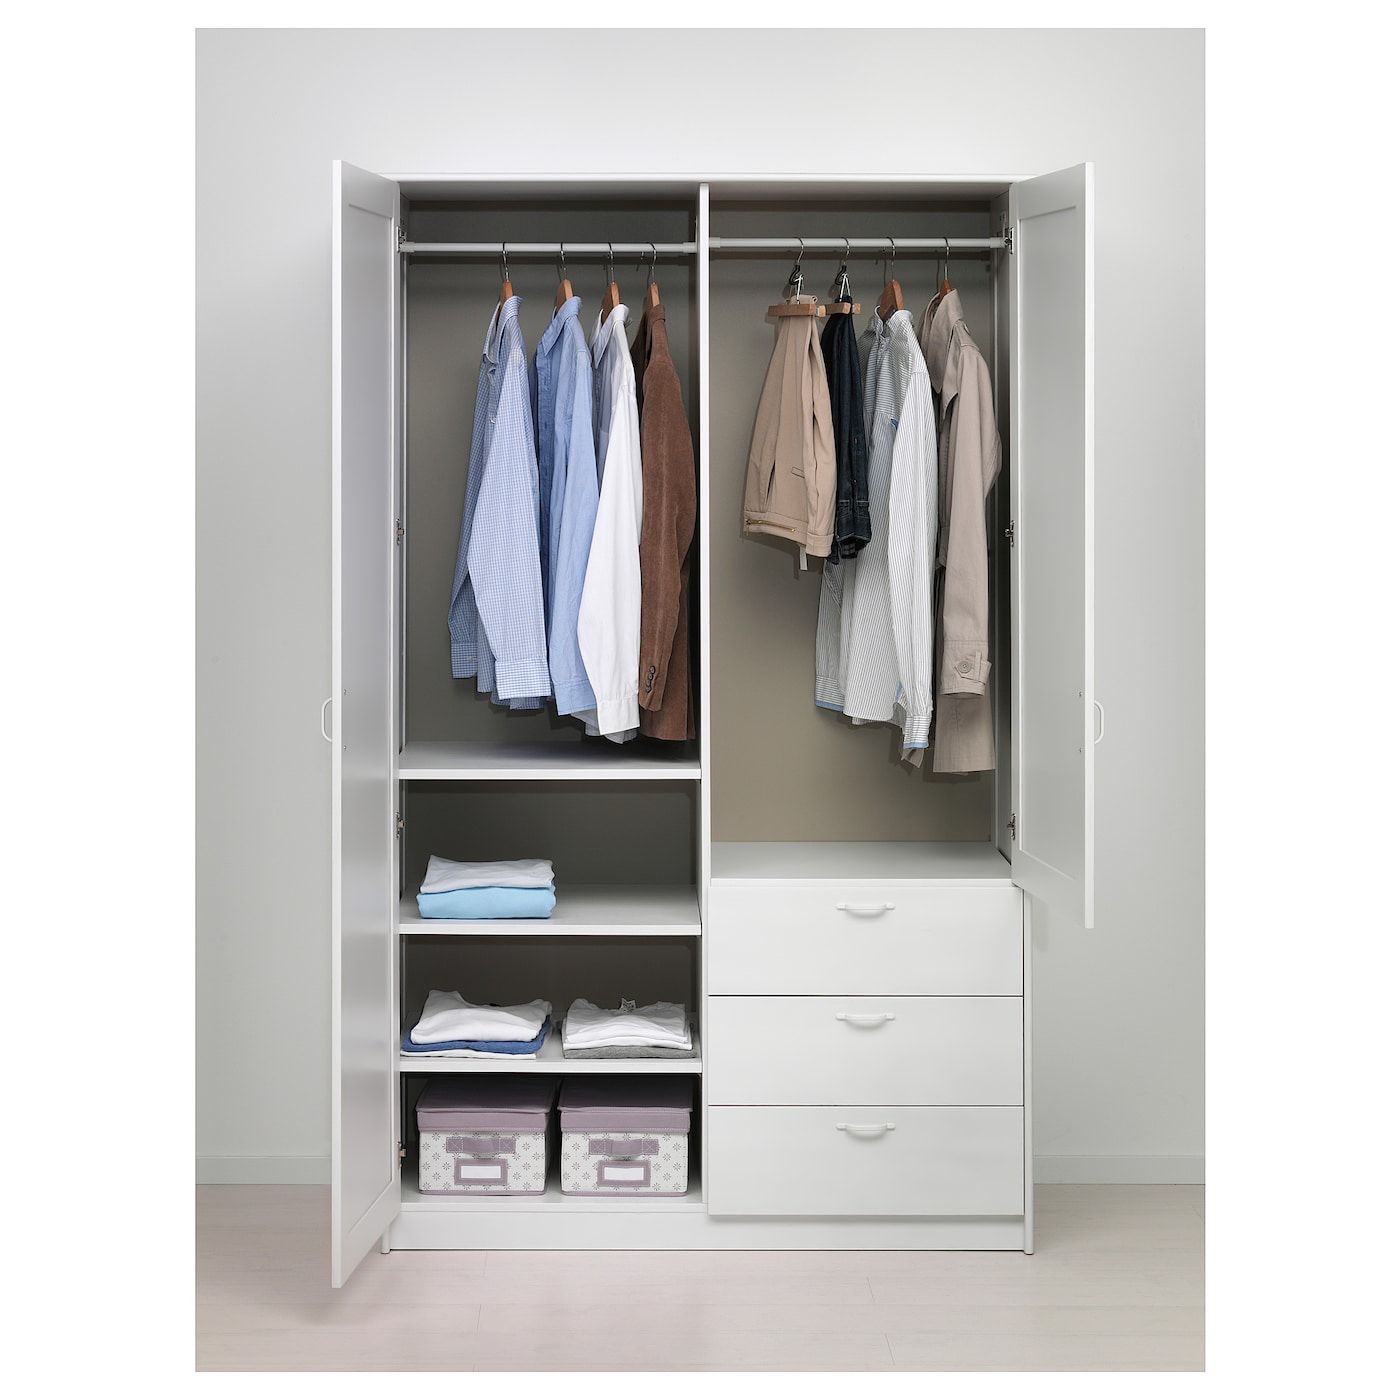 Musken Wardrobe With 2 Doors+3 Drawers, White, 124x60x201 Cm – Ikea Throughout Wardrobes With 3 Drawers (View 3 of 15)